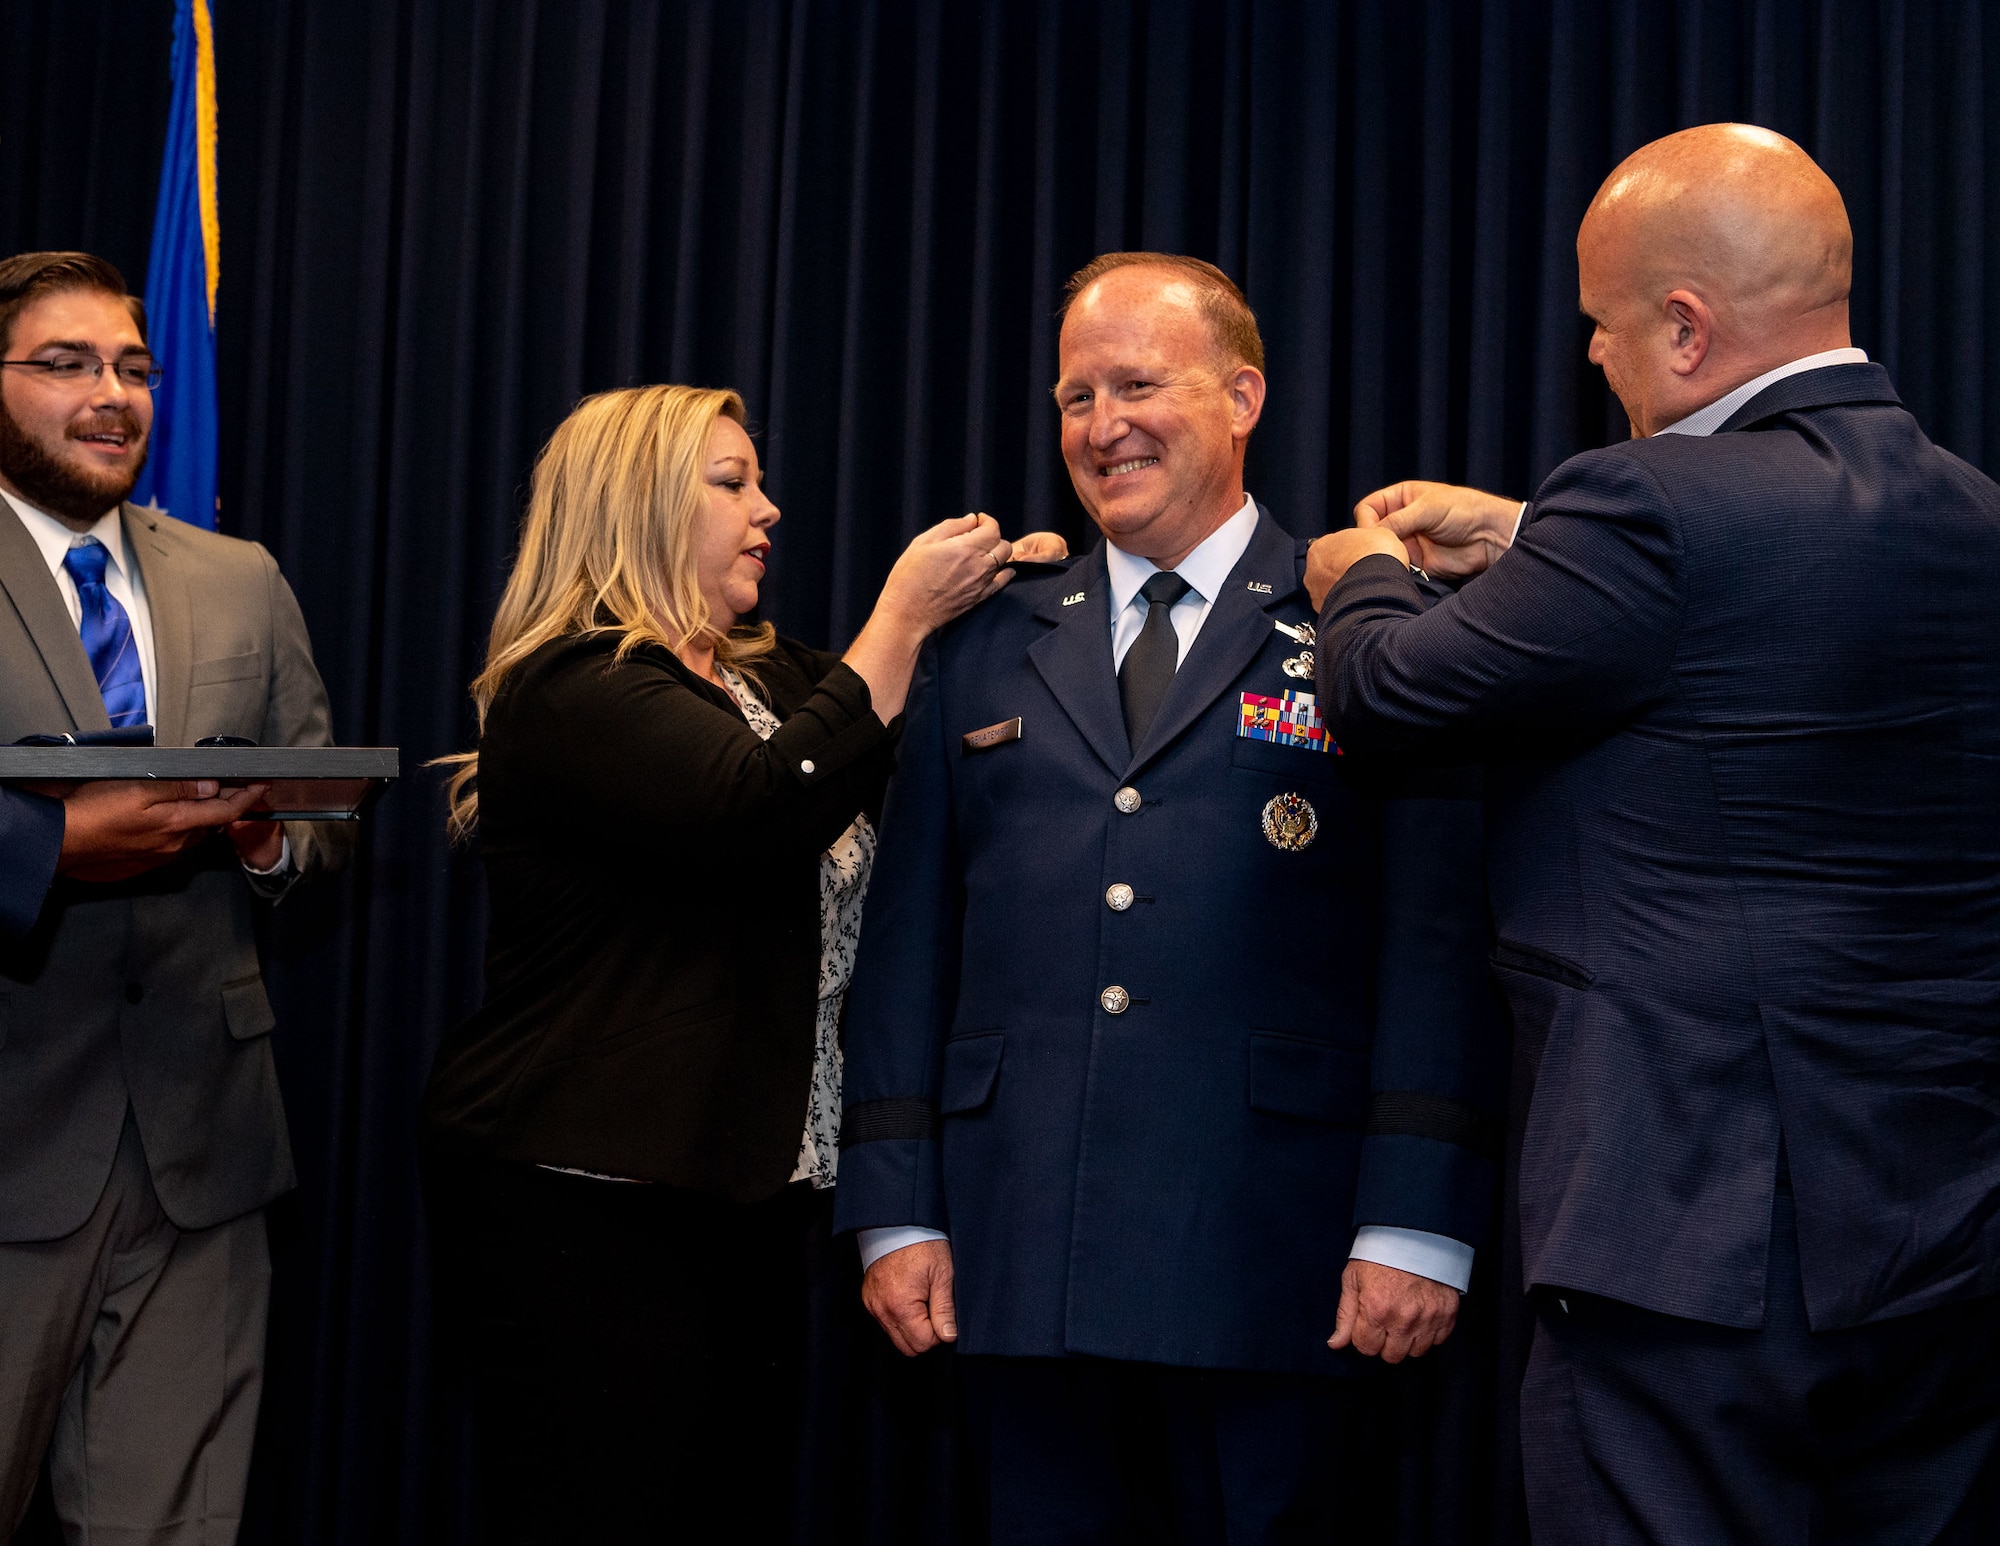 Maj. Gen. Anthony W. Genatempo, Air Force Nuclear Weapons Center commander and Air Force program executive officer for strategic systems, is pinned with the rank of Major General by his sister-in-law and brother, Cari and Mark Genatempo, with assistance from his son, Rett Genatempo (far left), during a promotion celebration at Kirtland Air Force Base, New Mexico, on July 9, 2021, His official promotion date was May 7, but the celebration was delayed to allow family and friends to attend after pandemic restrictions were eased. (U.S. Air Force photo by Allen Winston)